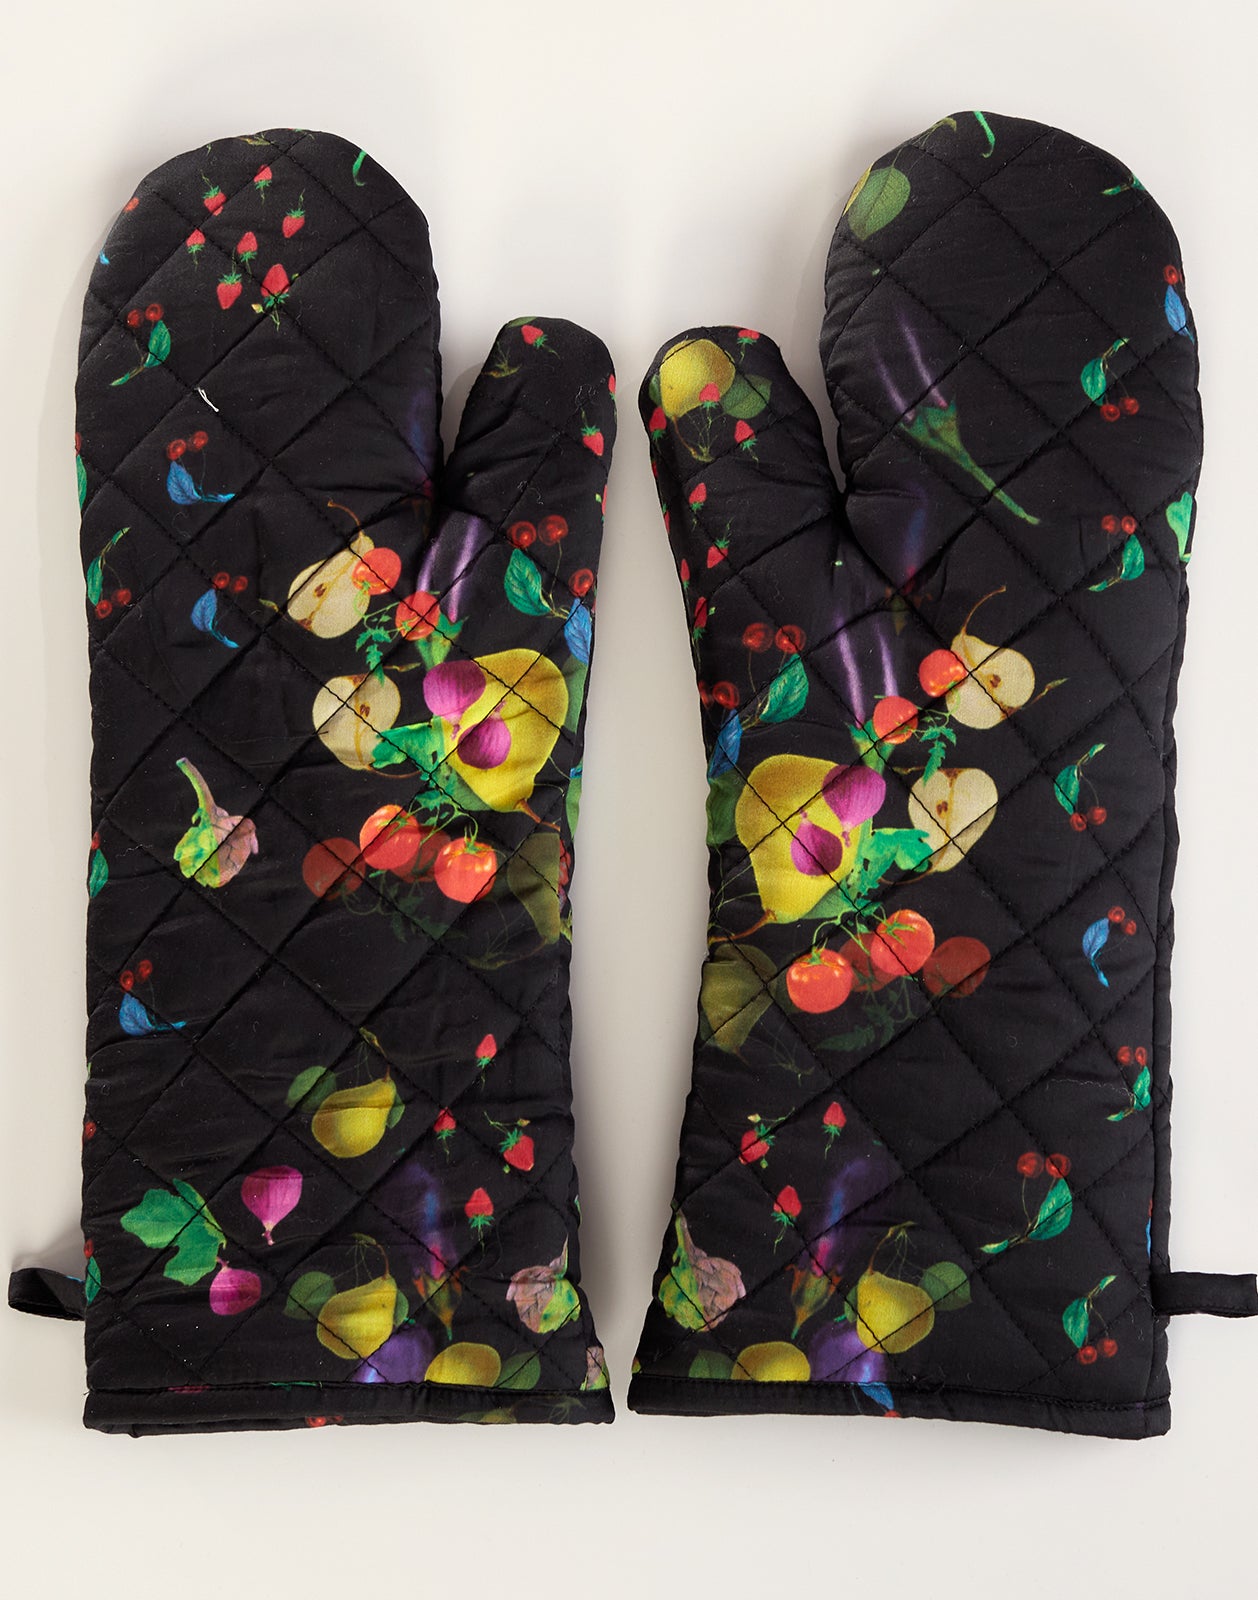 Oven Mitts – Cynthia Rowley